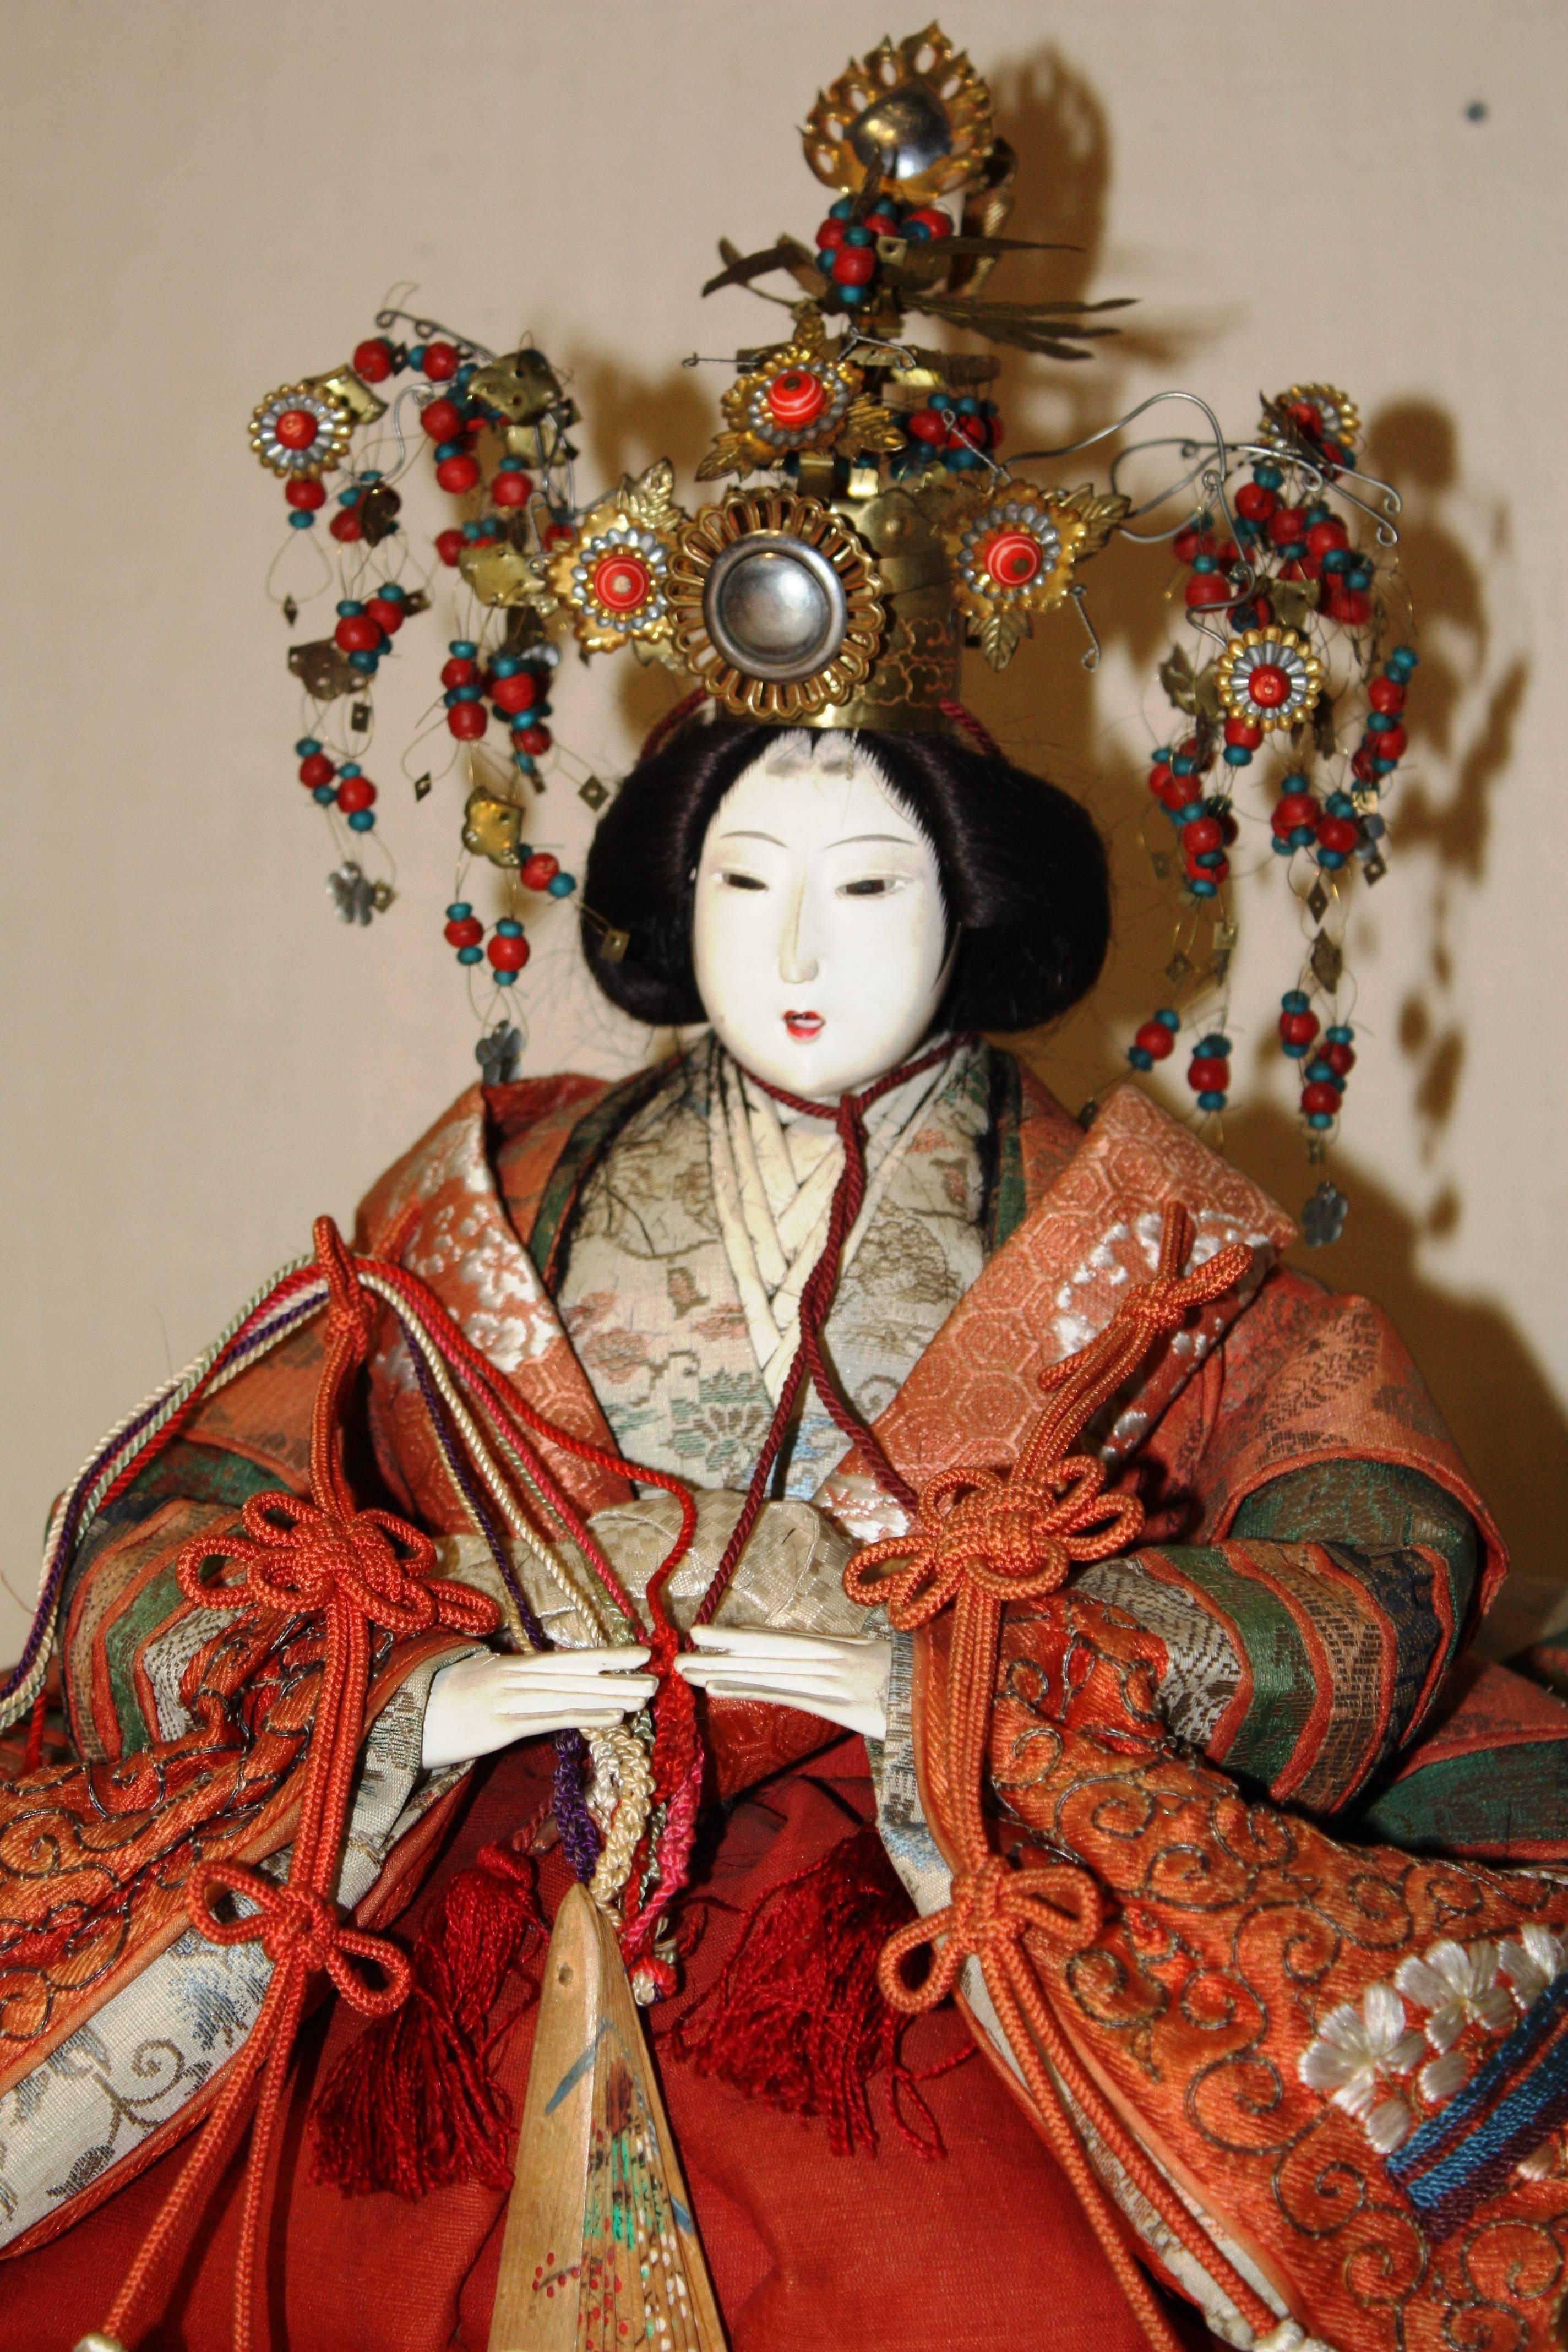 A Meiji Period Japanese doll depicting the Empress with elaborate head-dress, and wearing period clothing, 19th century. The face and hands glazed with crushed oyster shells (Gofun) to create the bright white finish.